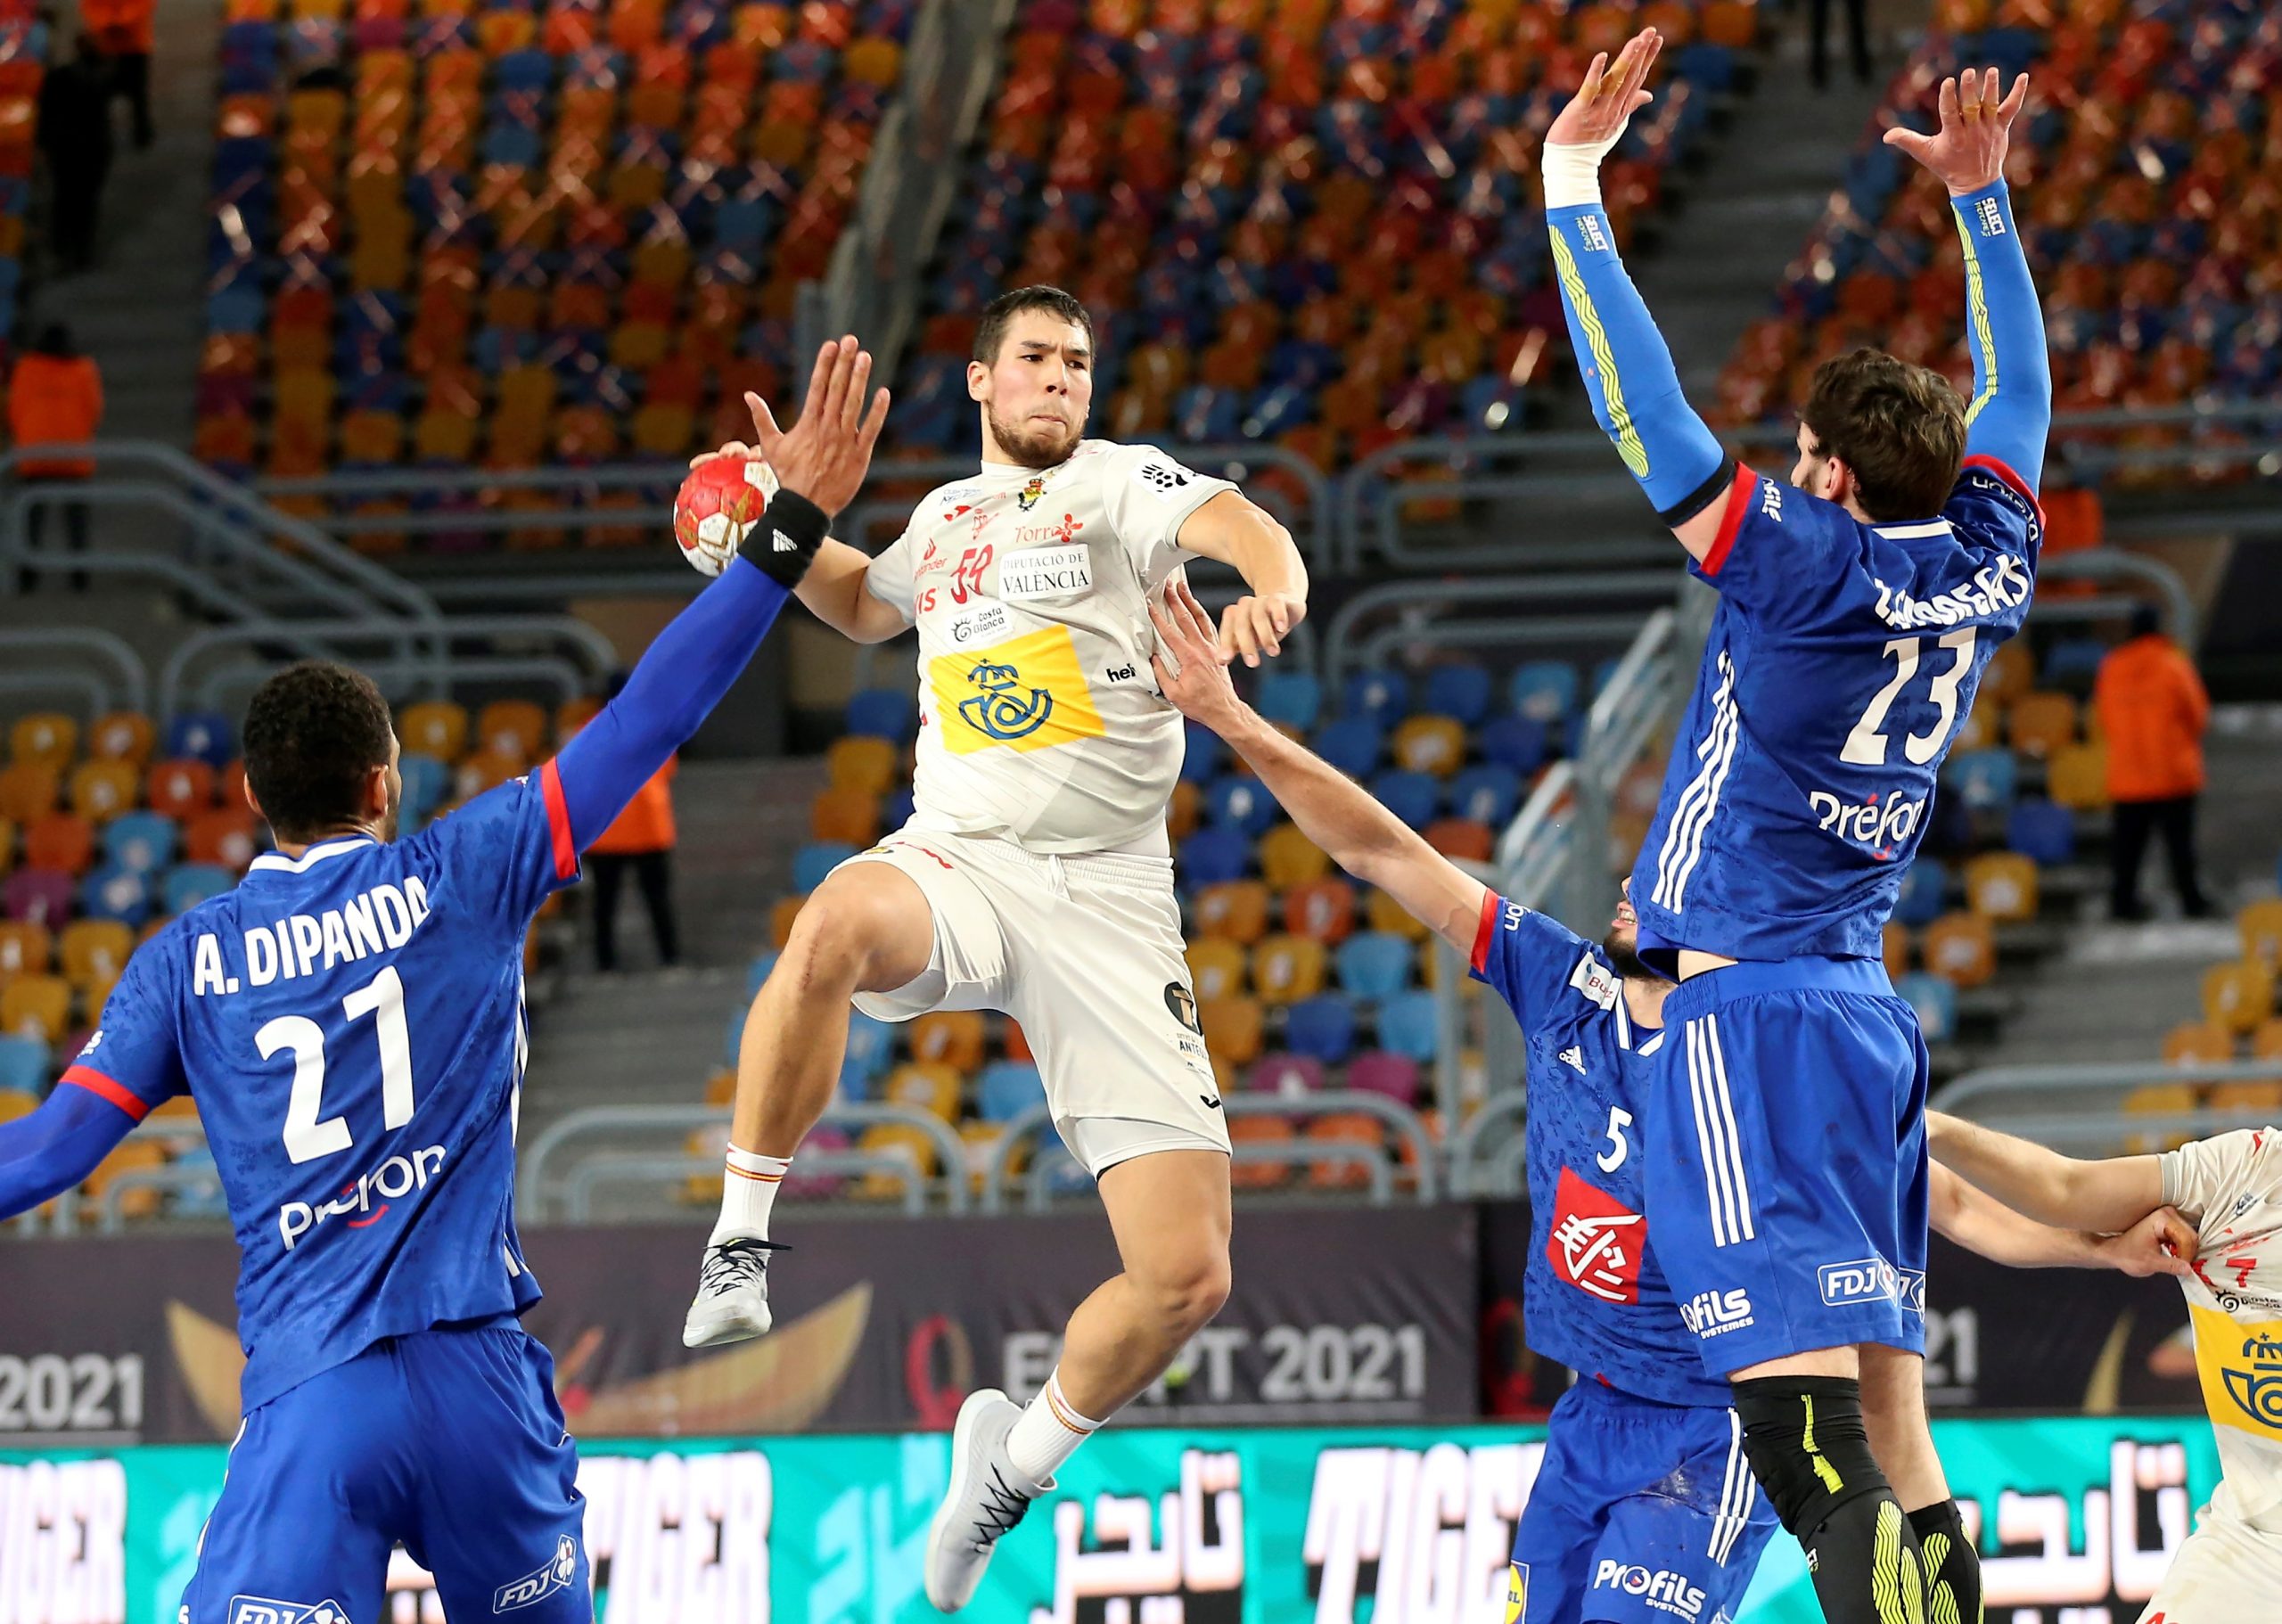 epa08977592 Spain's Daniel Dujshbaev (C) in action against France's Ludovic Fabregas (R) during the Bronze Medal match between Spain and France at the 27th Men's Handball World Championship in Cairo, Egypt, 31 January 2021.  EPA/KHALED ELFIQI